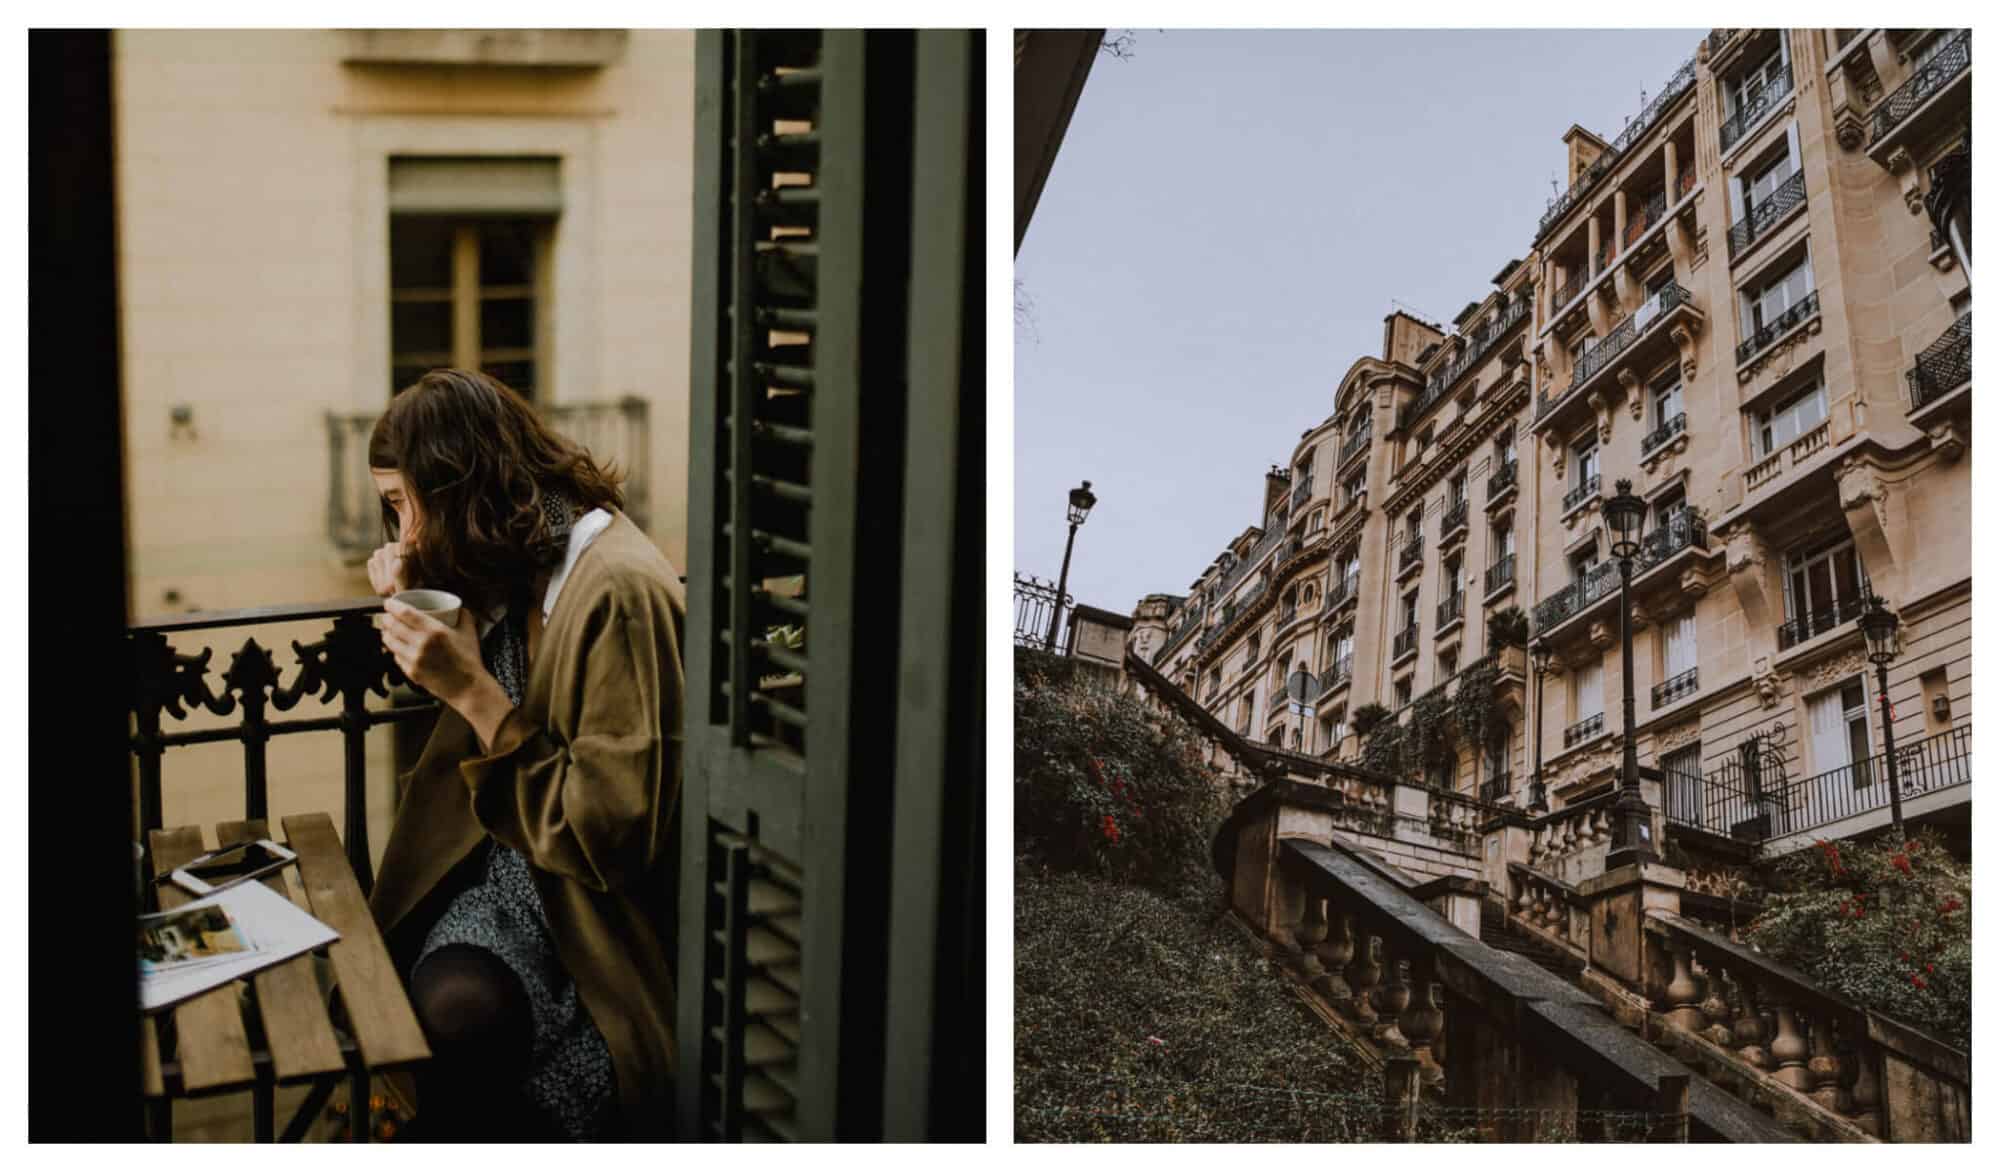 Left: A woman leans over a railing of her Parisian balcony, sitting at a wooden slatted table with her phone and some papers in front of her. She holds a cup of coffee close to her face and leans against the railing, looking down into the street below. Right: A view of the iconic Montmartre staircases, looking up towards the façade of the building to the right and the grey sky above.